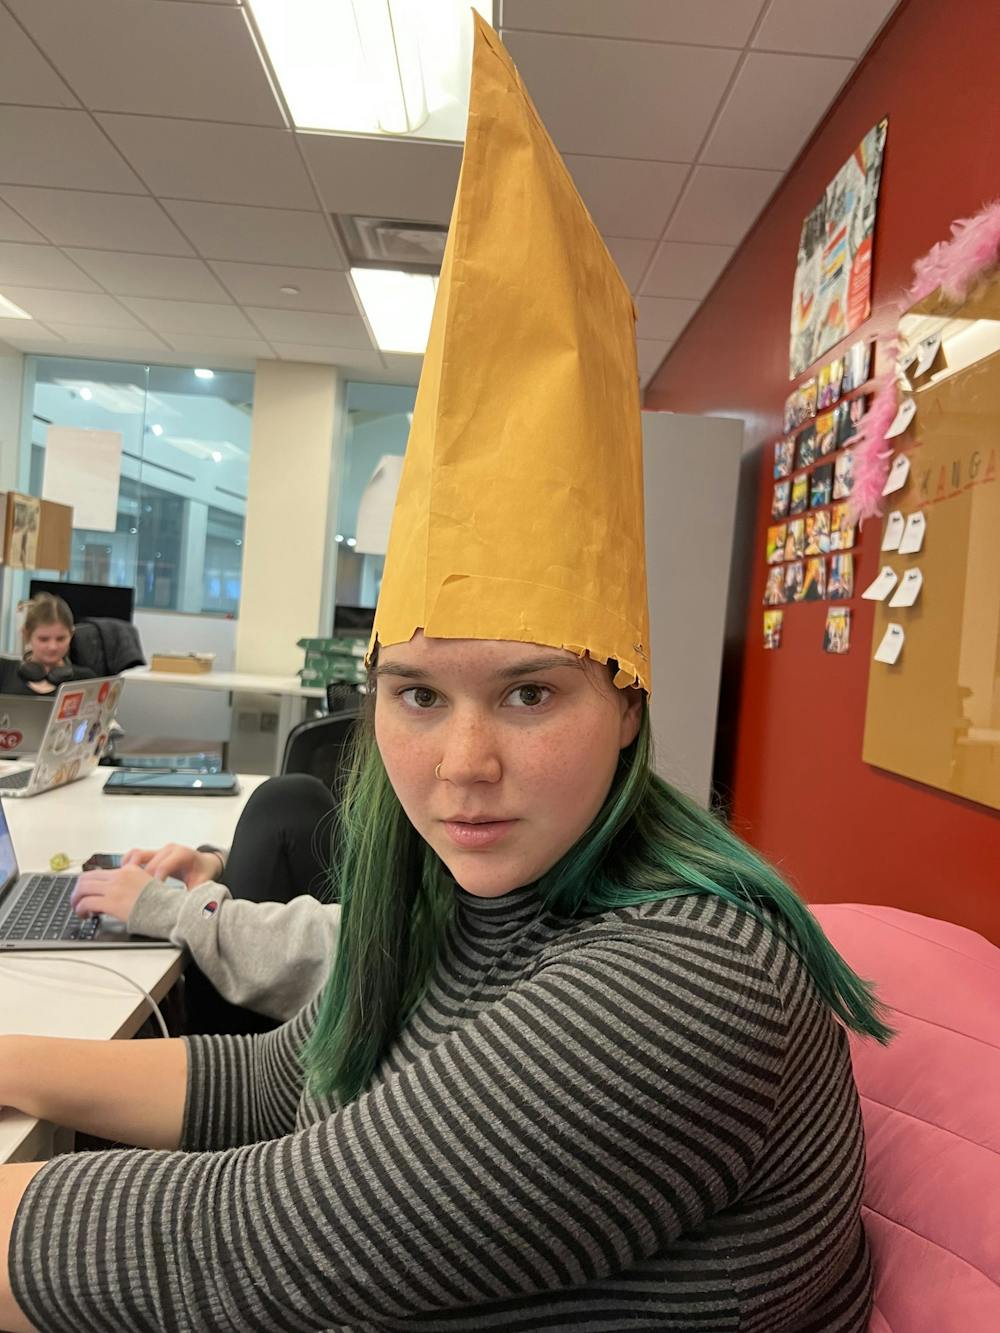 Outgoing Entertainment editor Maggie Peña will miss all the friends she&#x27;s made at The Miami Student, and all the fun times they have together (including this manila envelope hat).